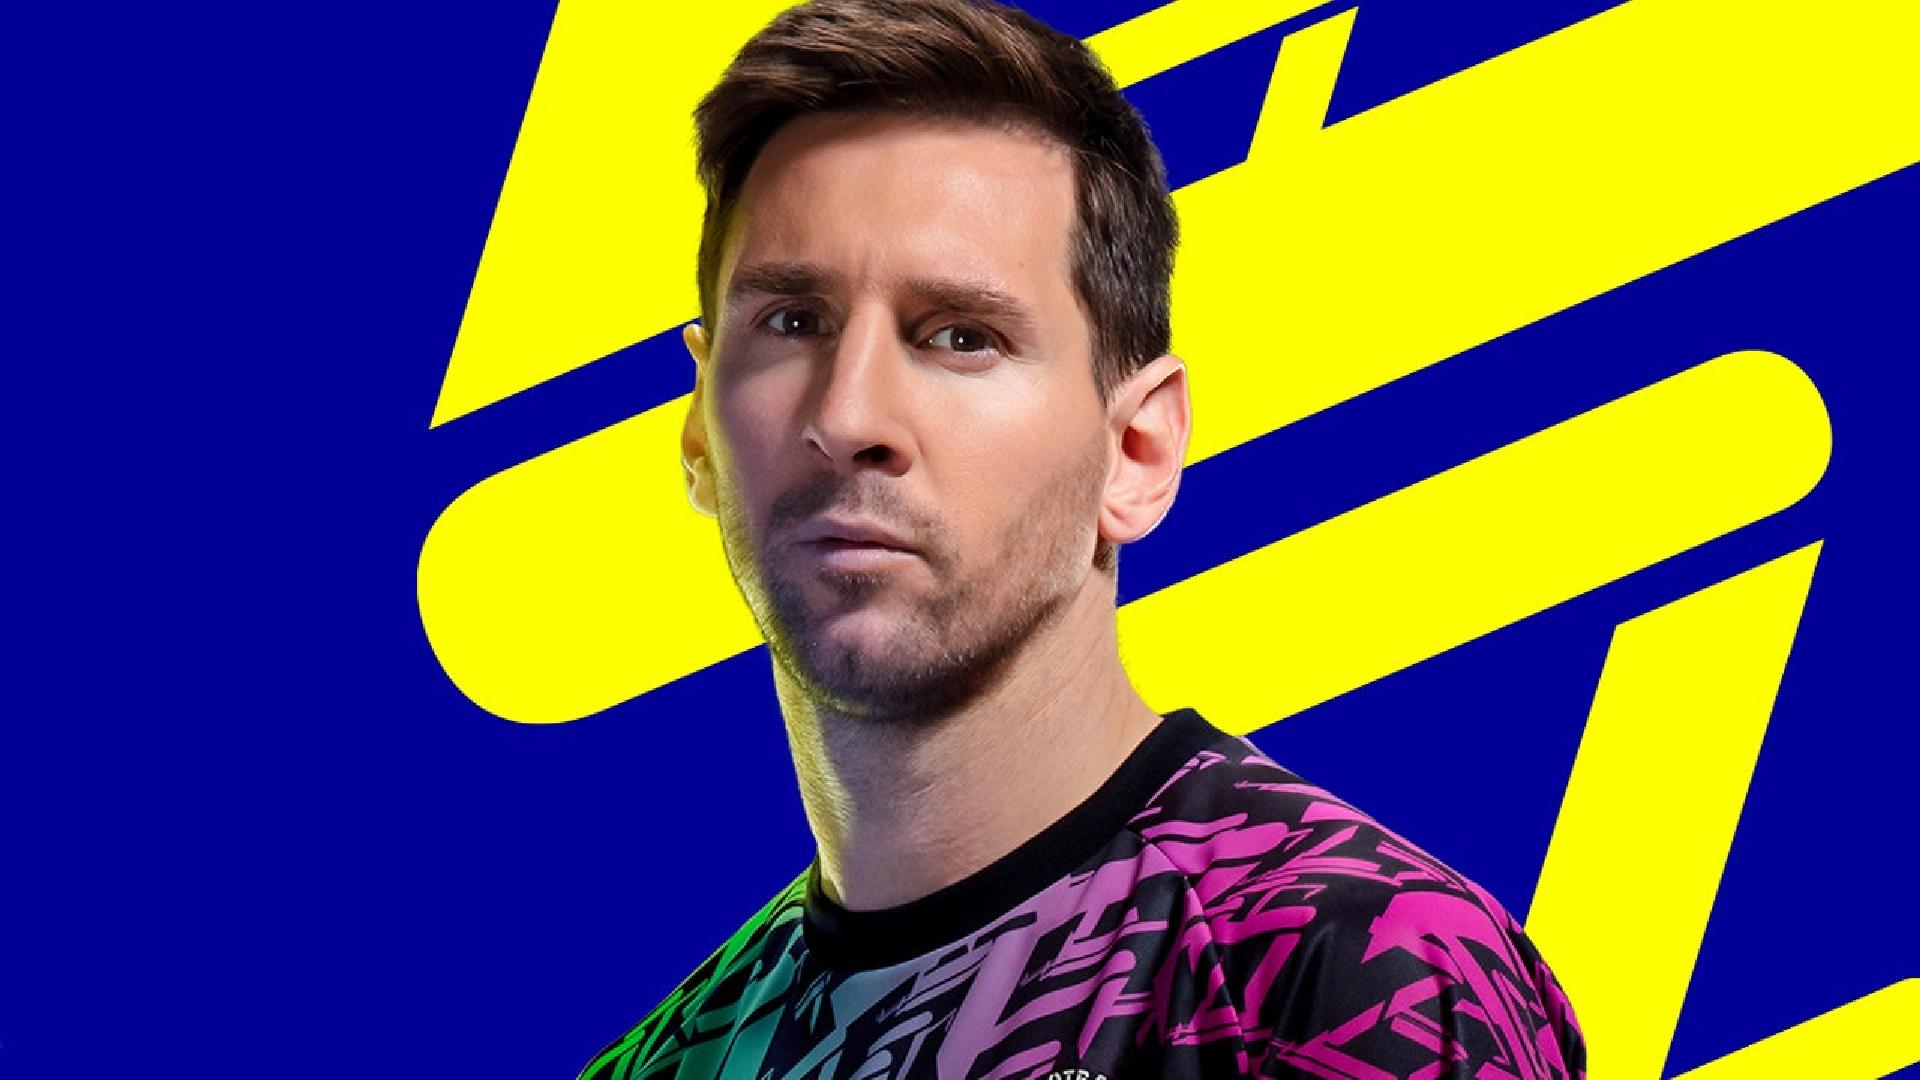 Messi stands looking at the camera in the game's official key art.